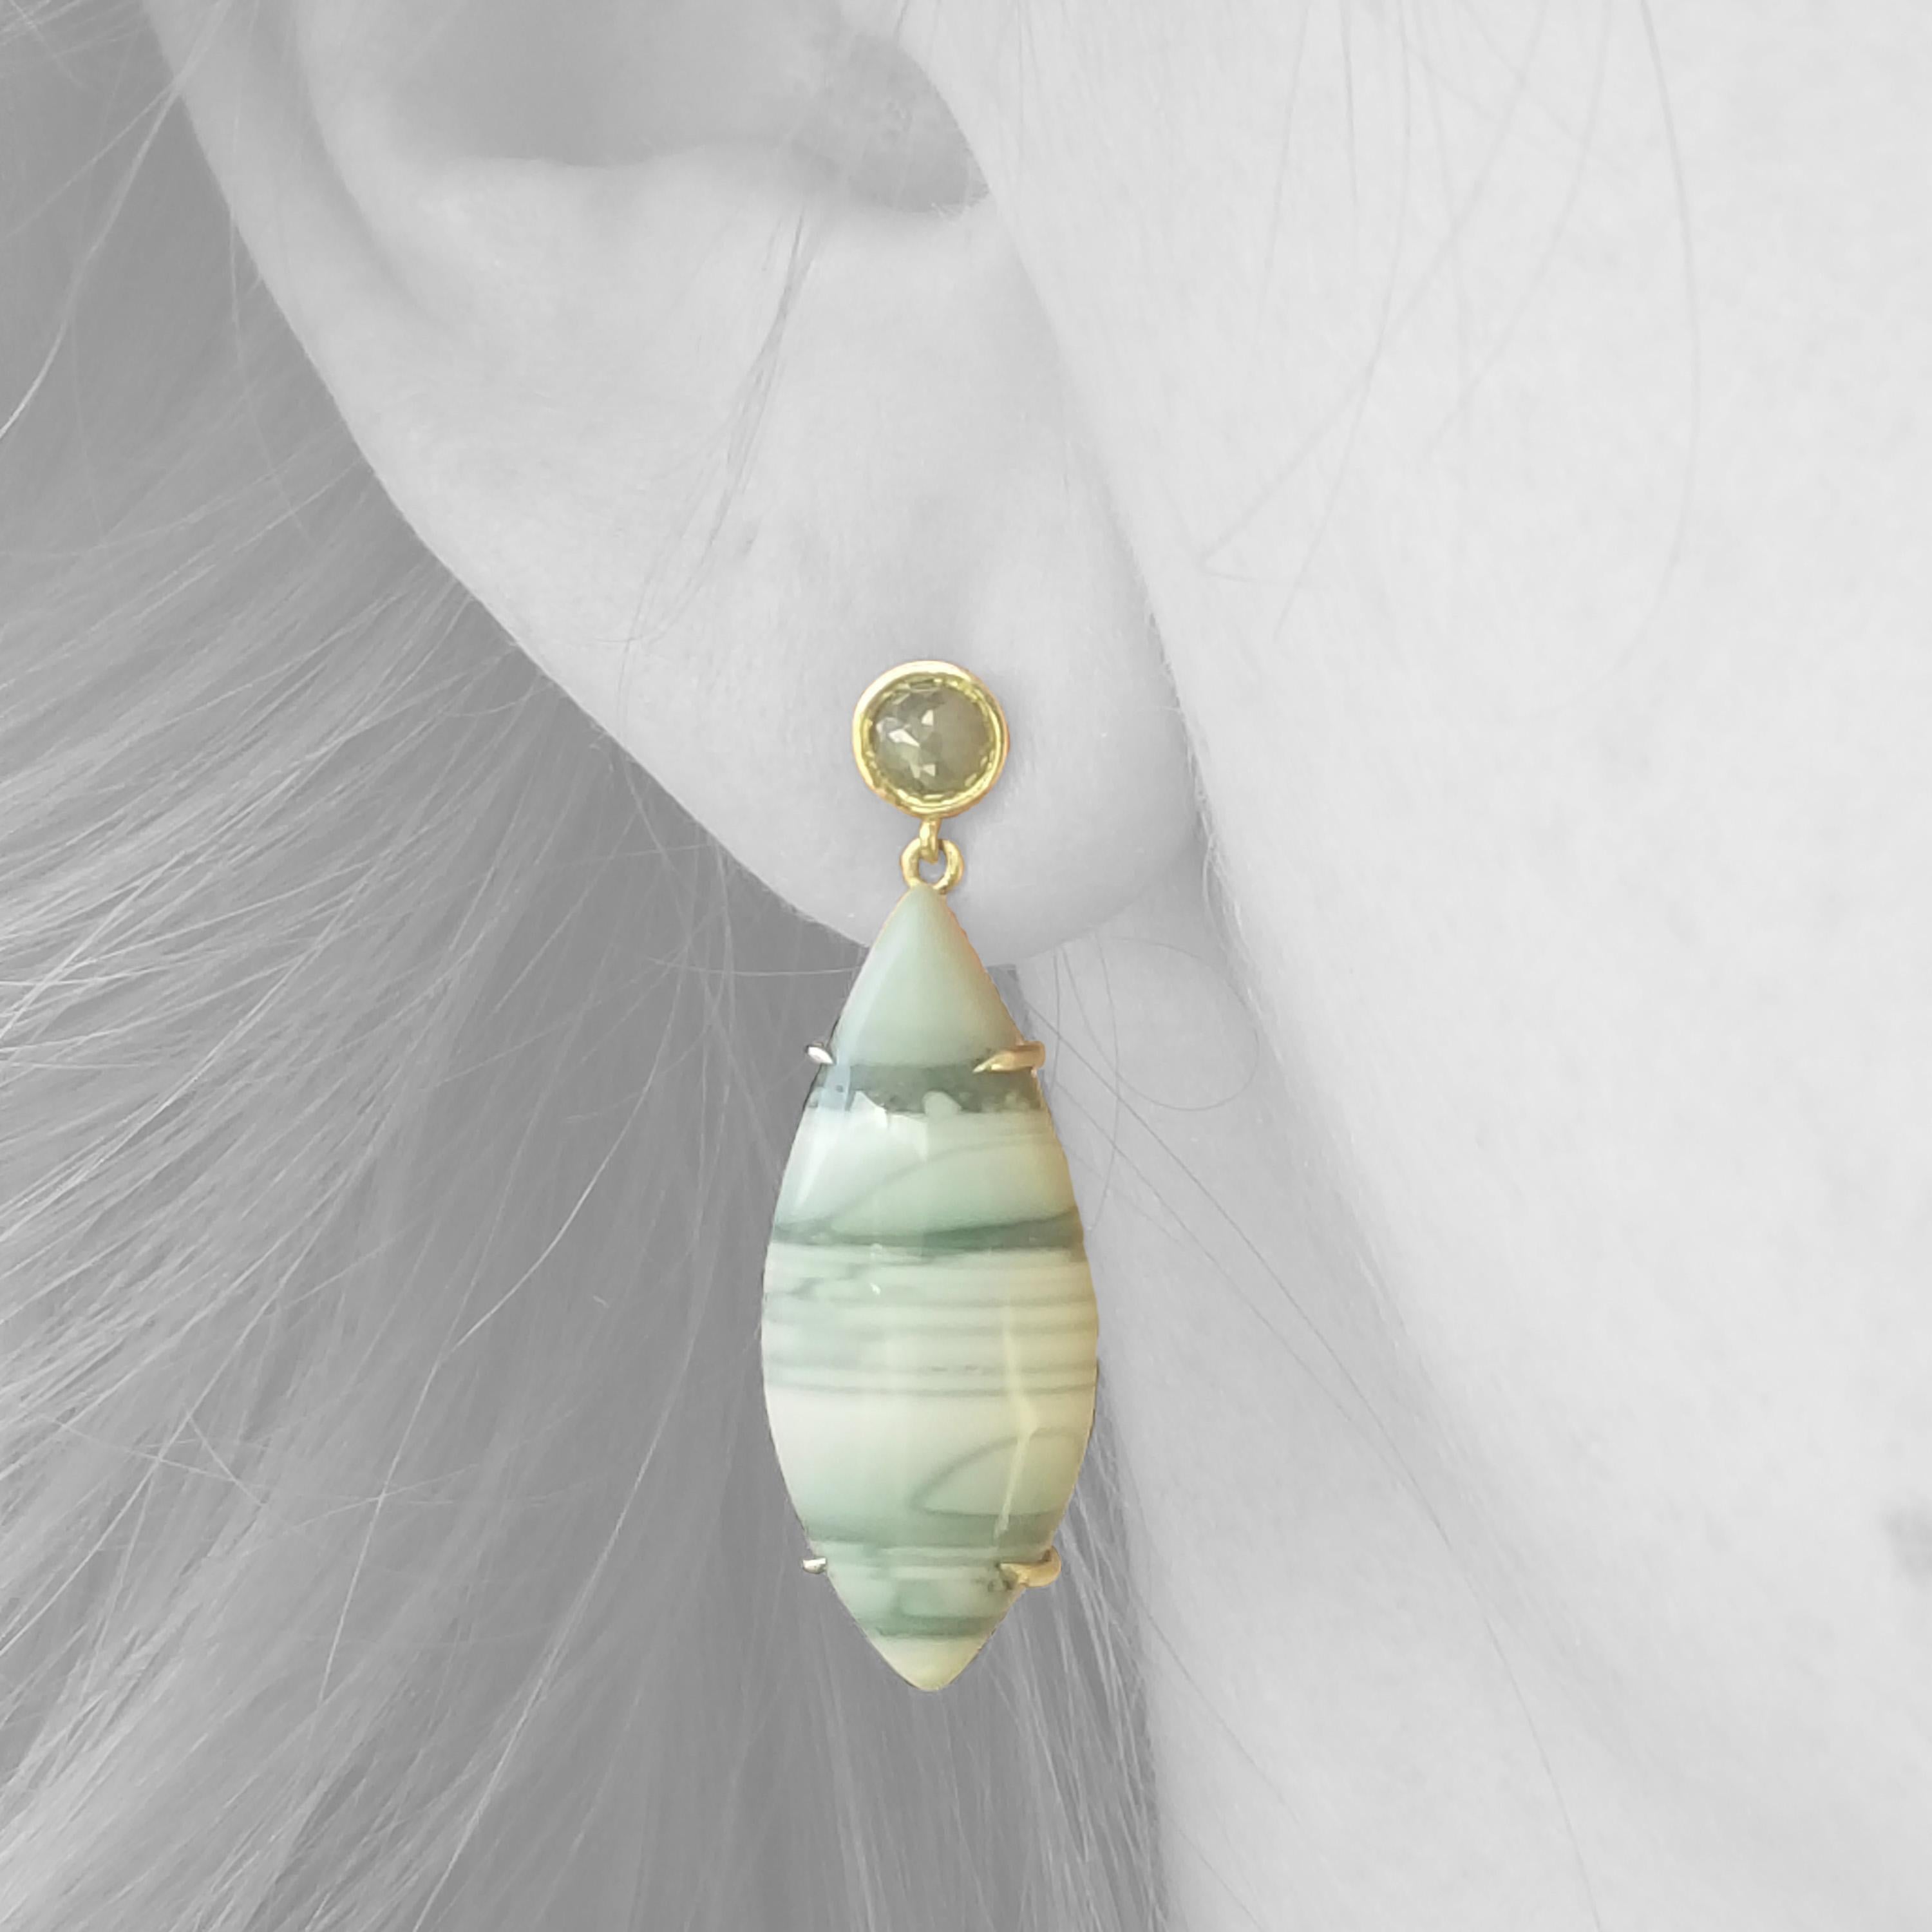 The enchanting and graceful natural pattern of the Saturn Chalcedony is a beautiful place to start a jewelry design. The delicate navette shapes are transformed into the perfect earring drops, and the accompanying silver/green translucent rose cut